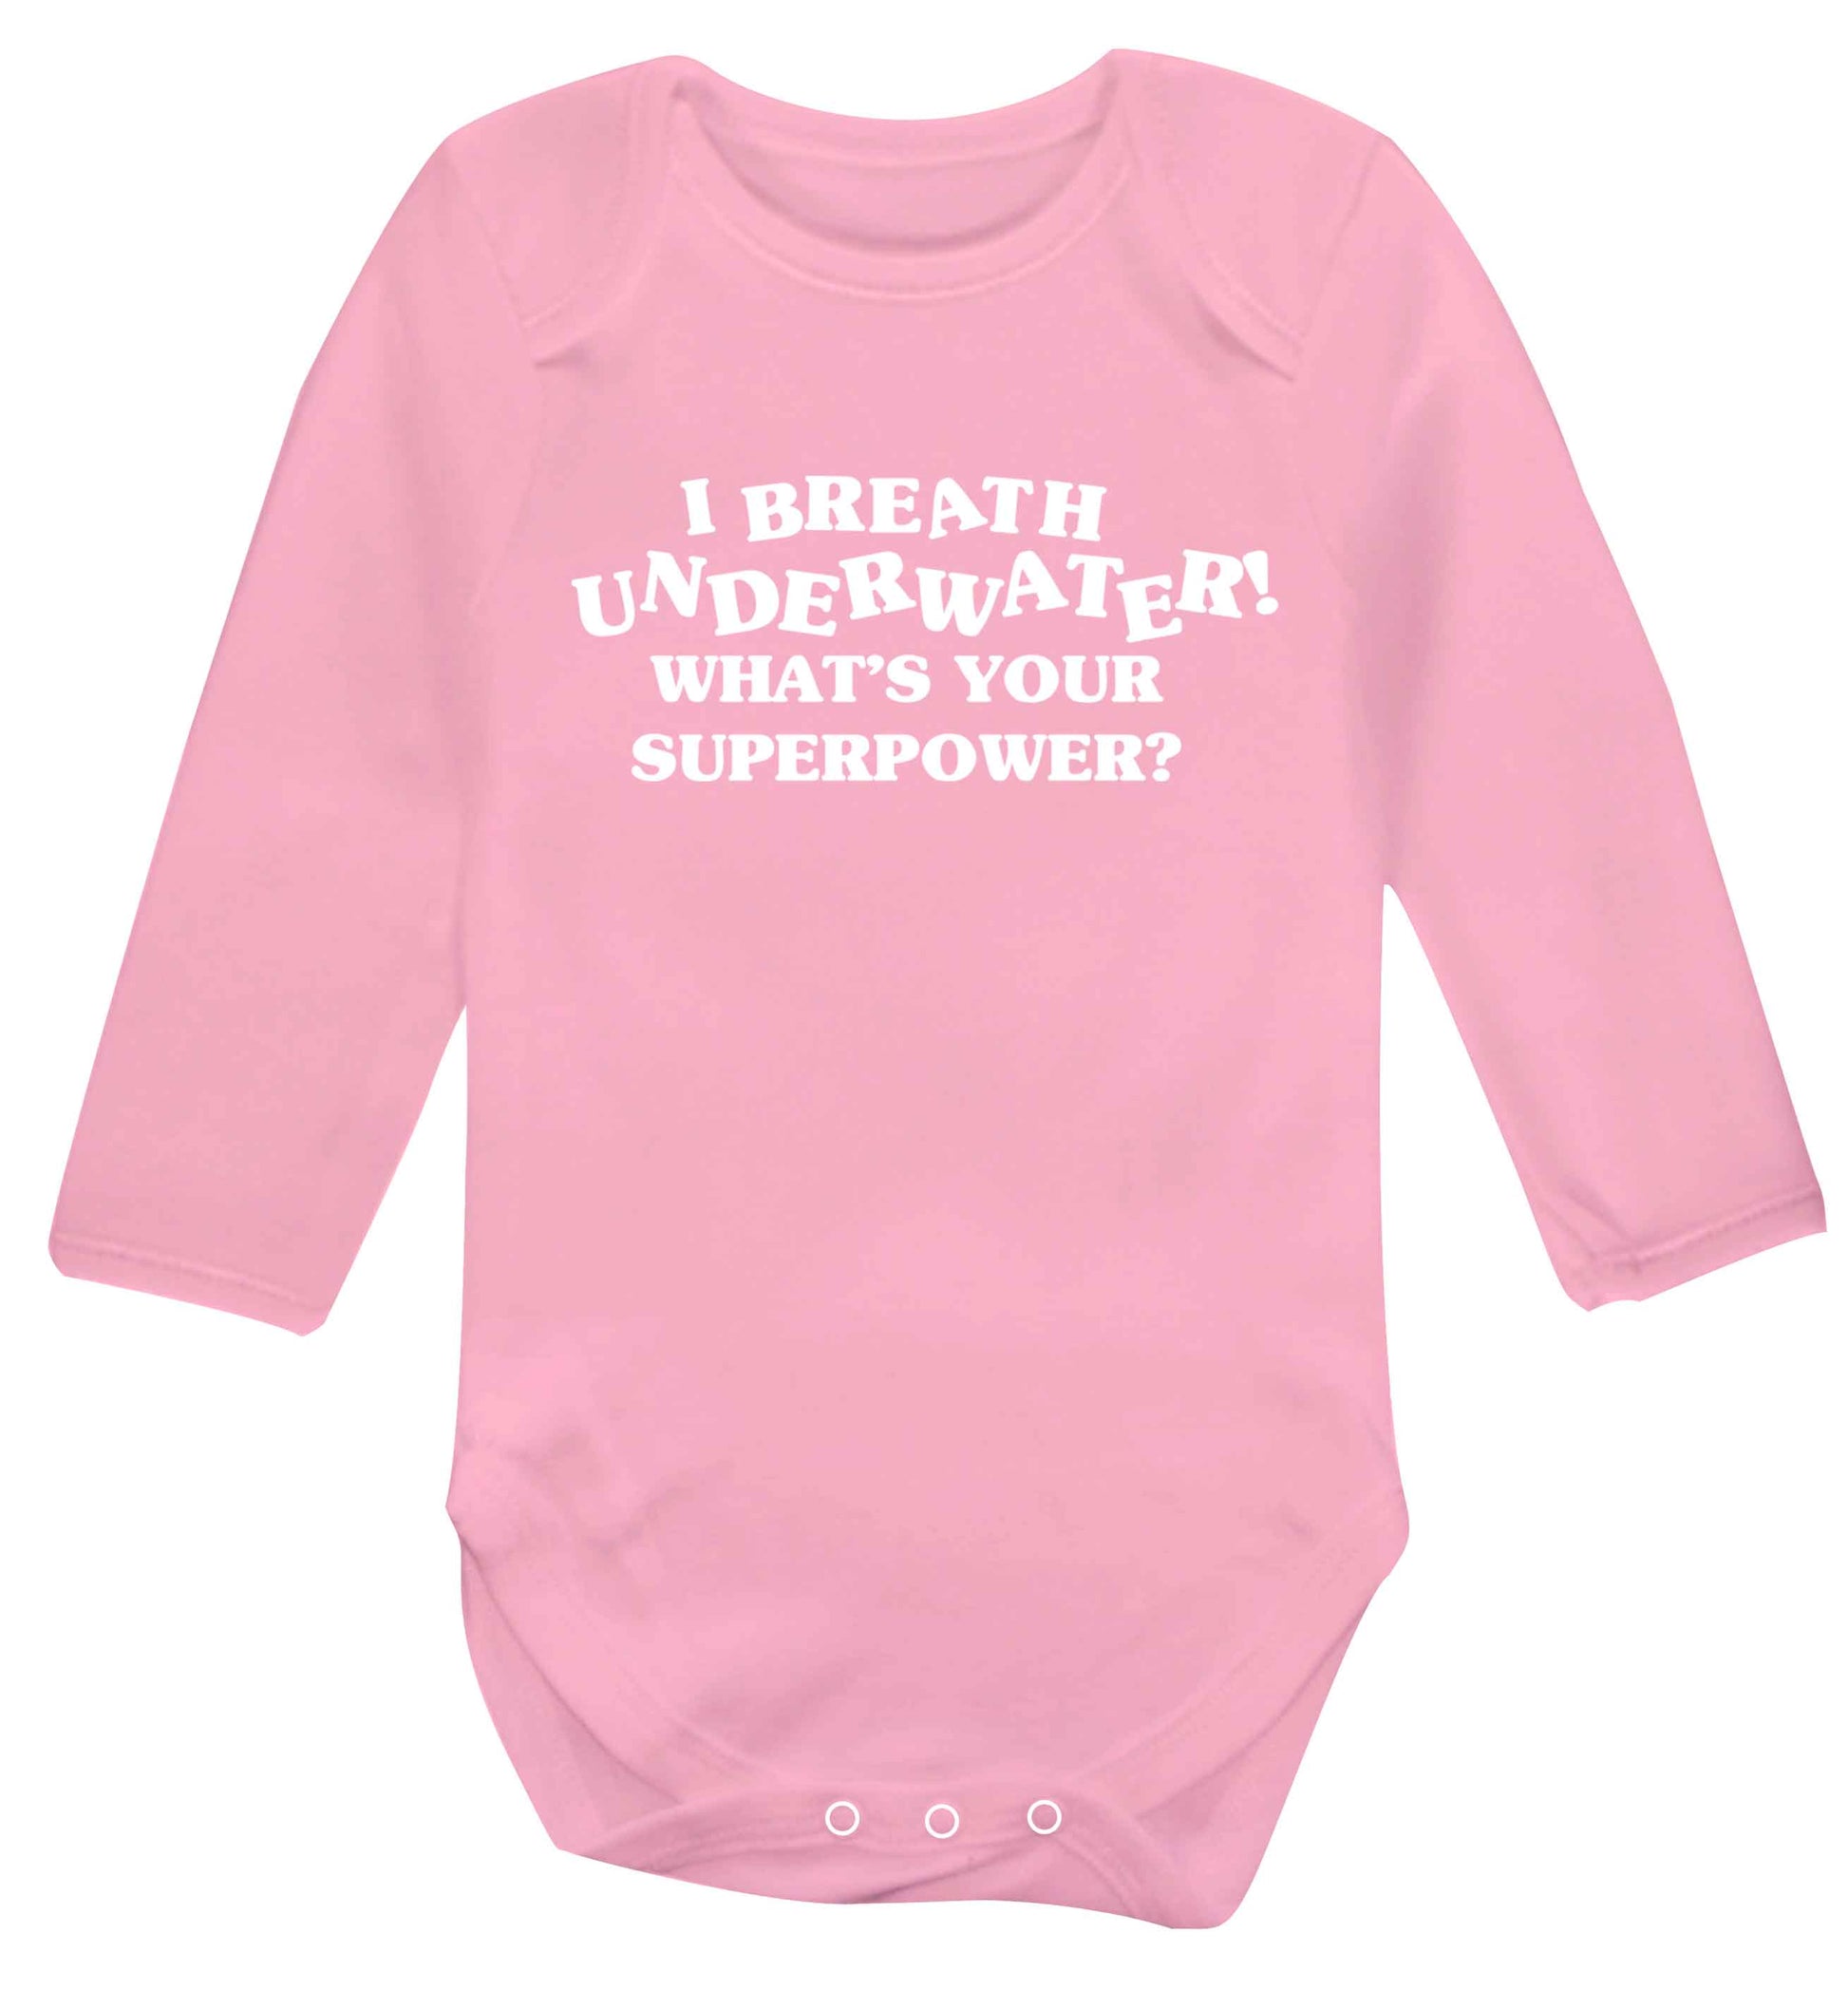 I breath underwater what's your superpower? Baby Vest long sleeved pale pink 6-12 months